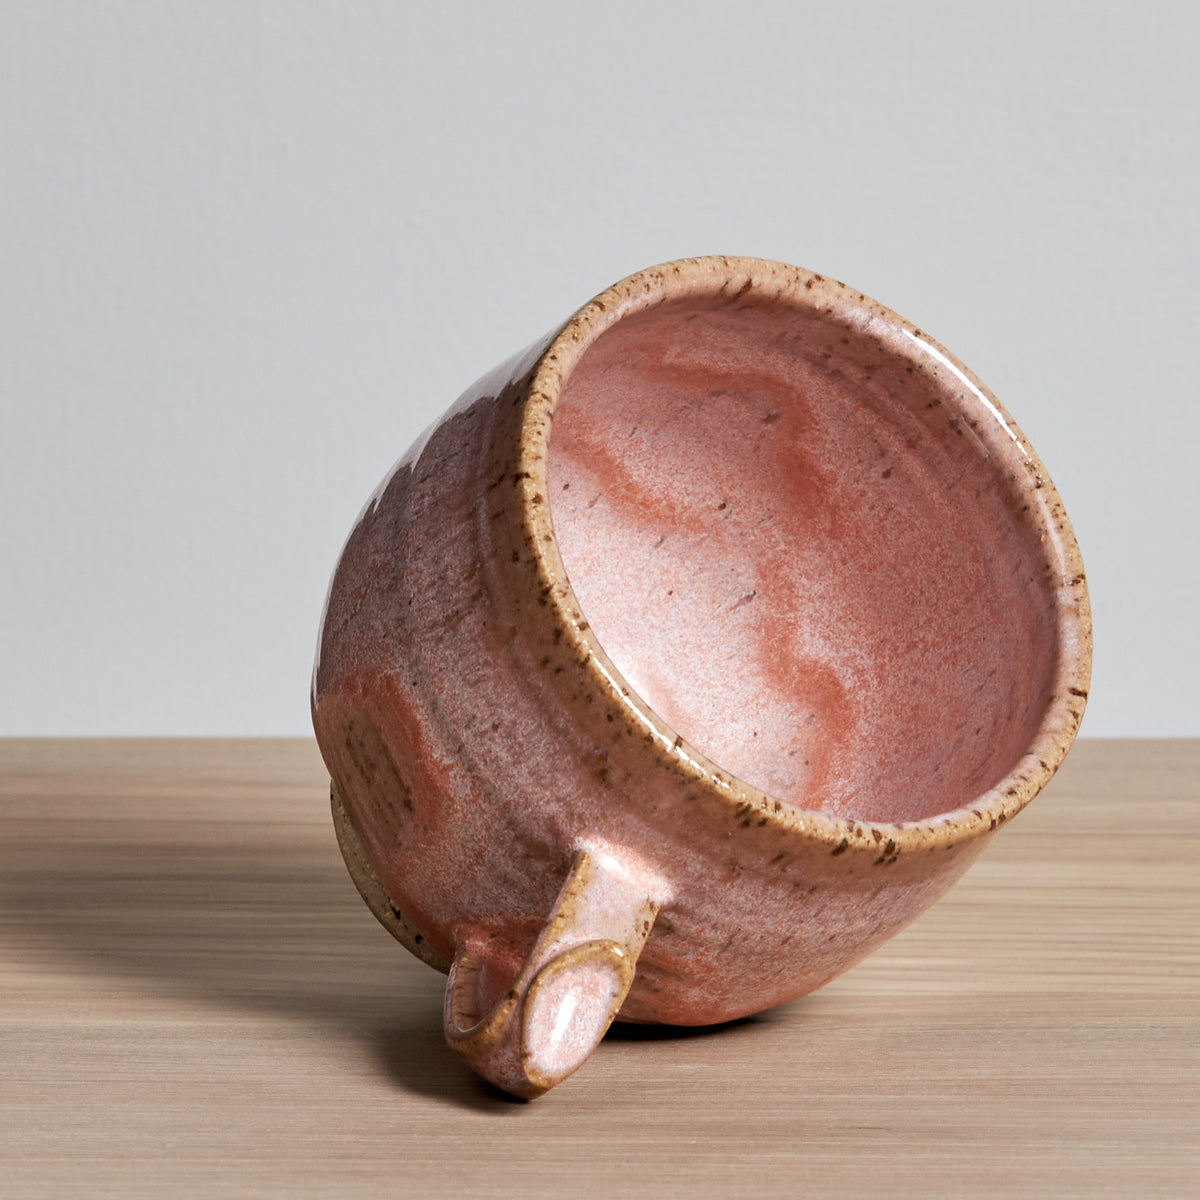 A Bird Handle Cup - Rhubarb from Jino Ceramic Studio sitting on a wooden table.